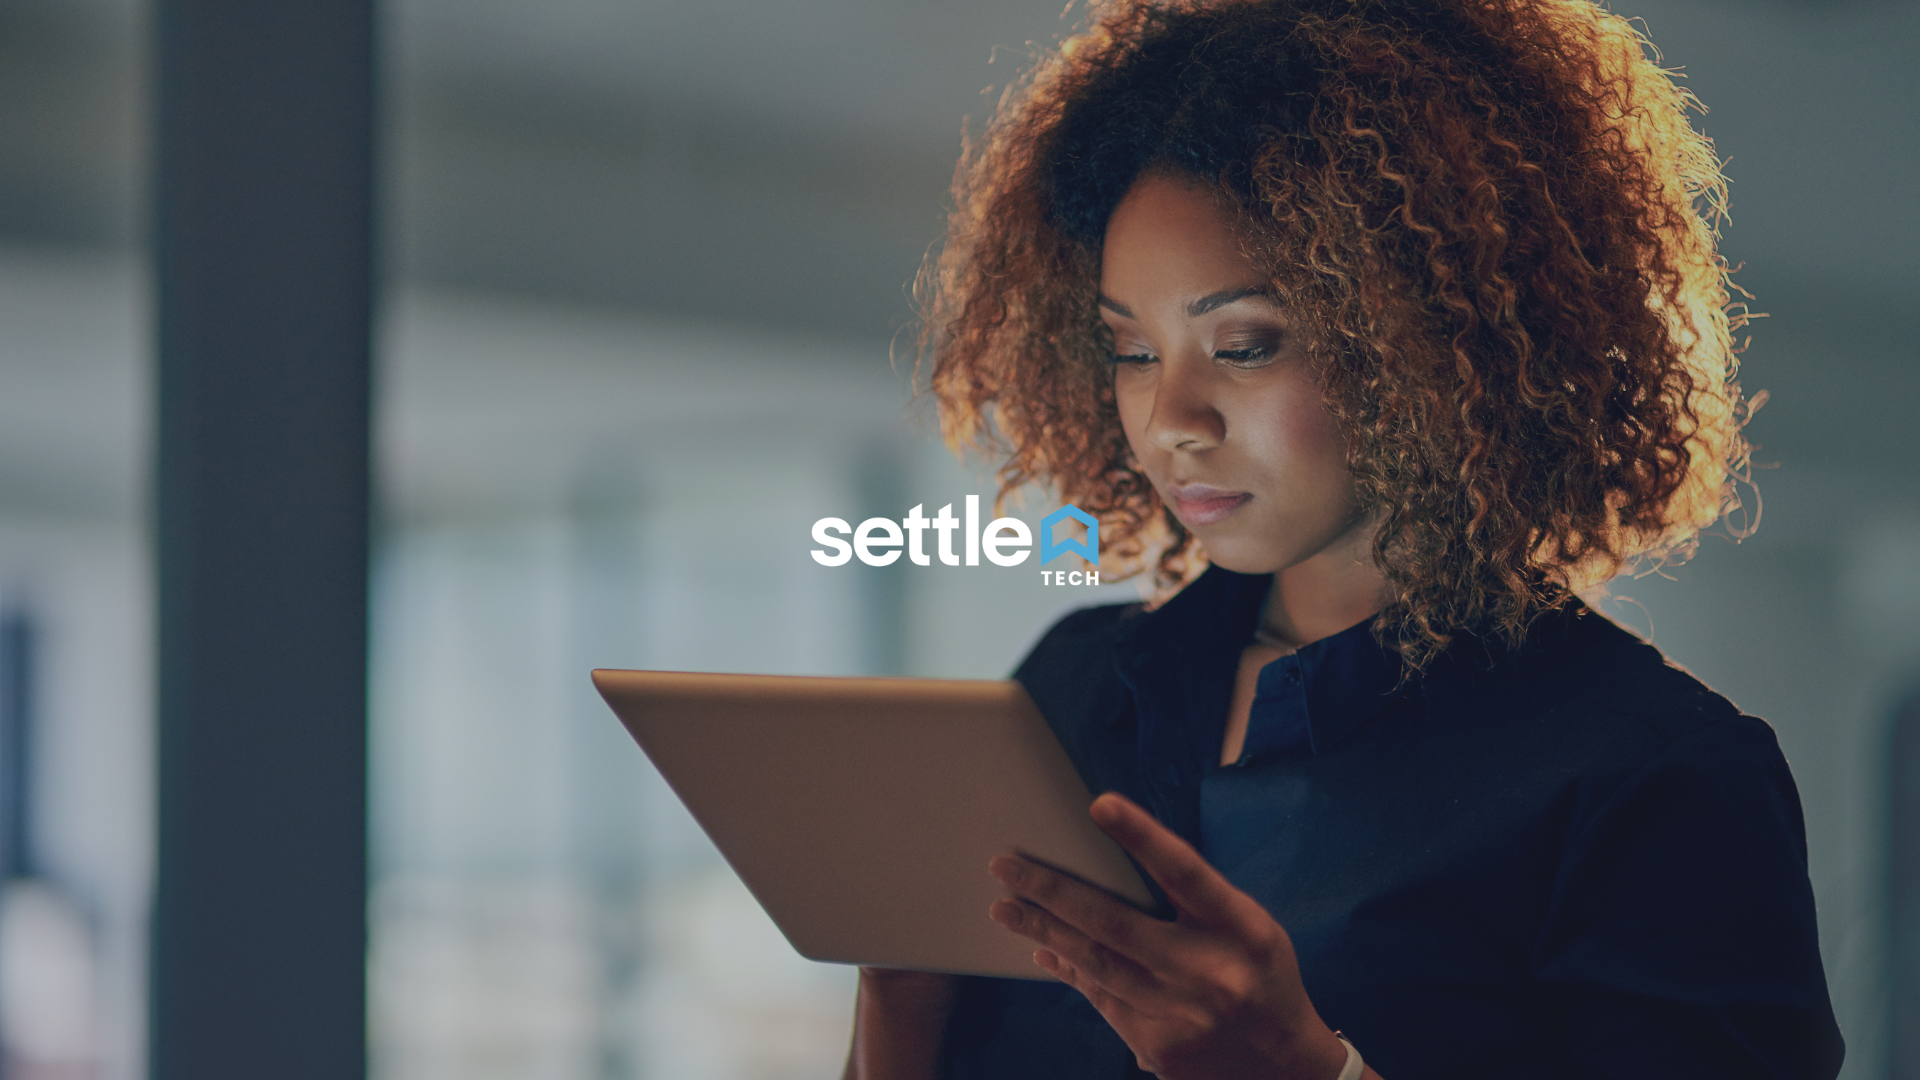 How does SettleTech work? 